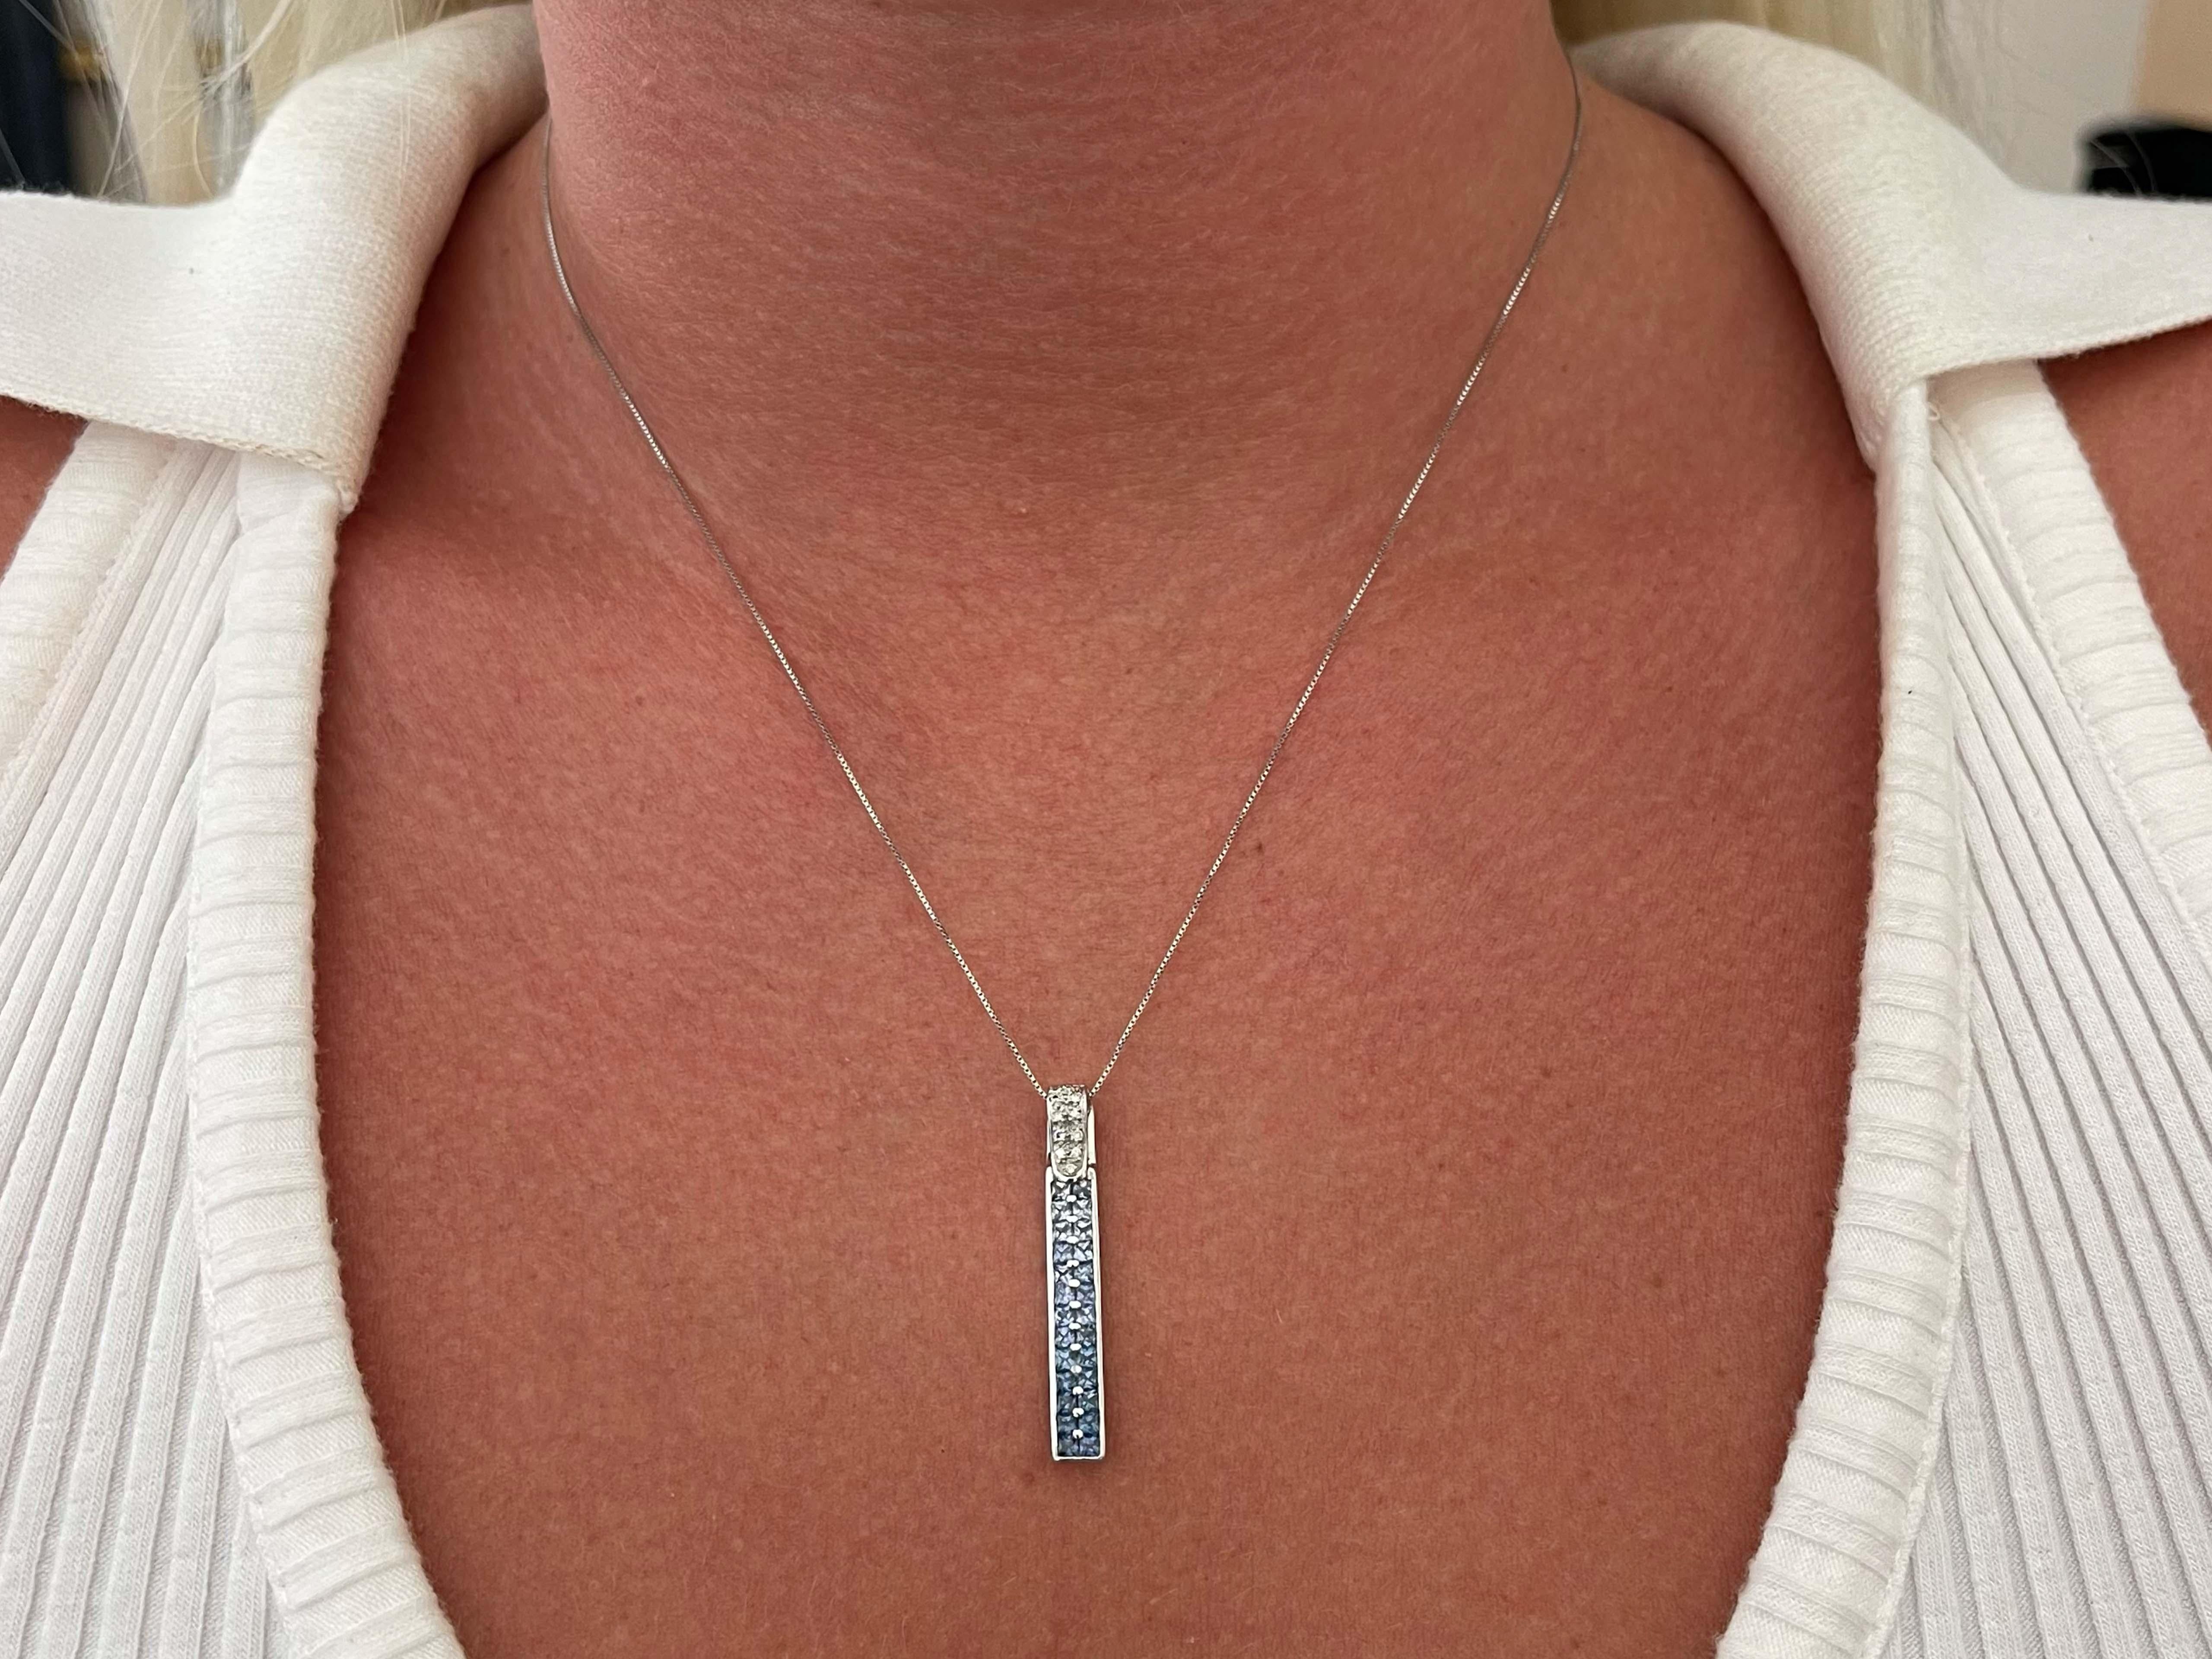 (chain included )

Item Specifications:

Necklace Metal: 14k White Gold

Total Weight: 3.6 Grams

Chain Length: 18